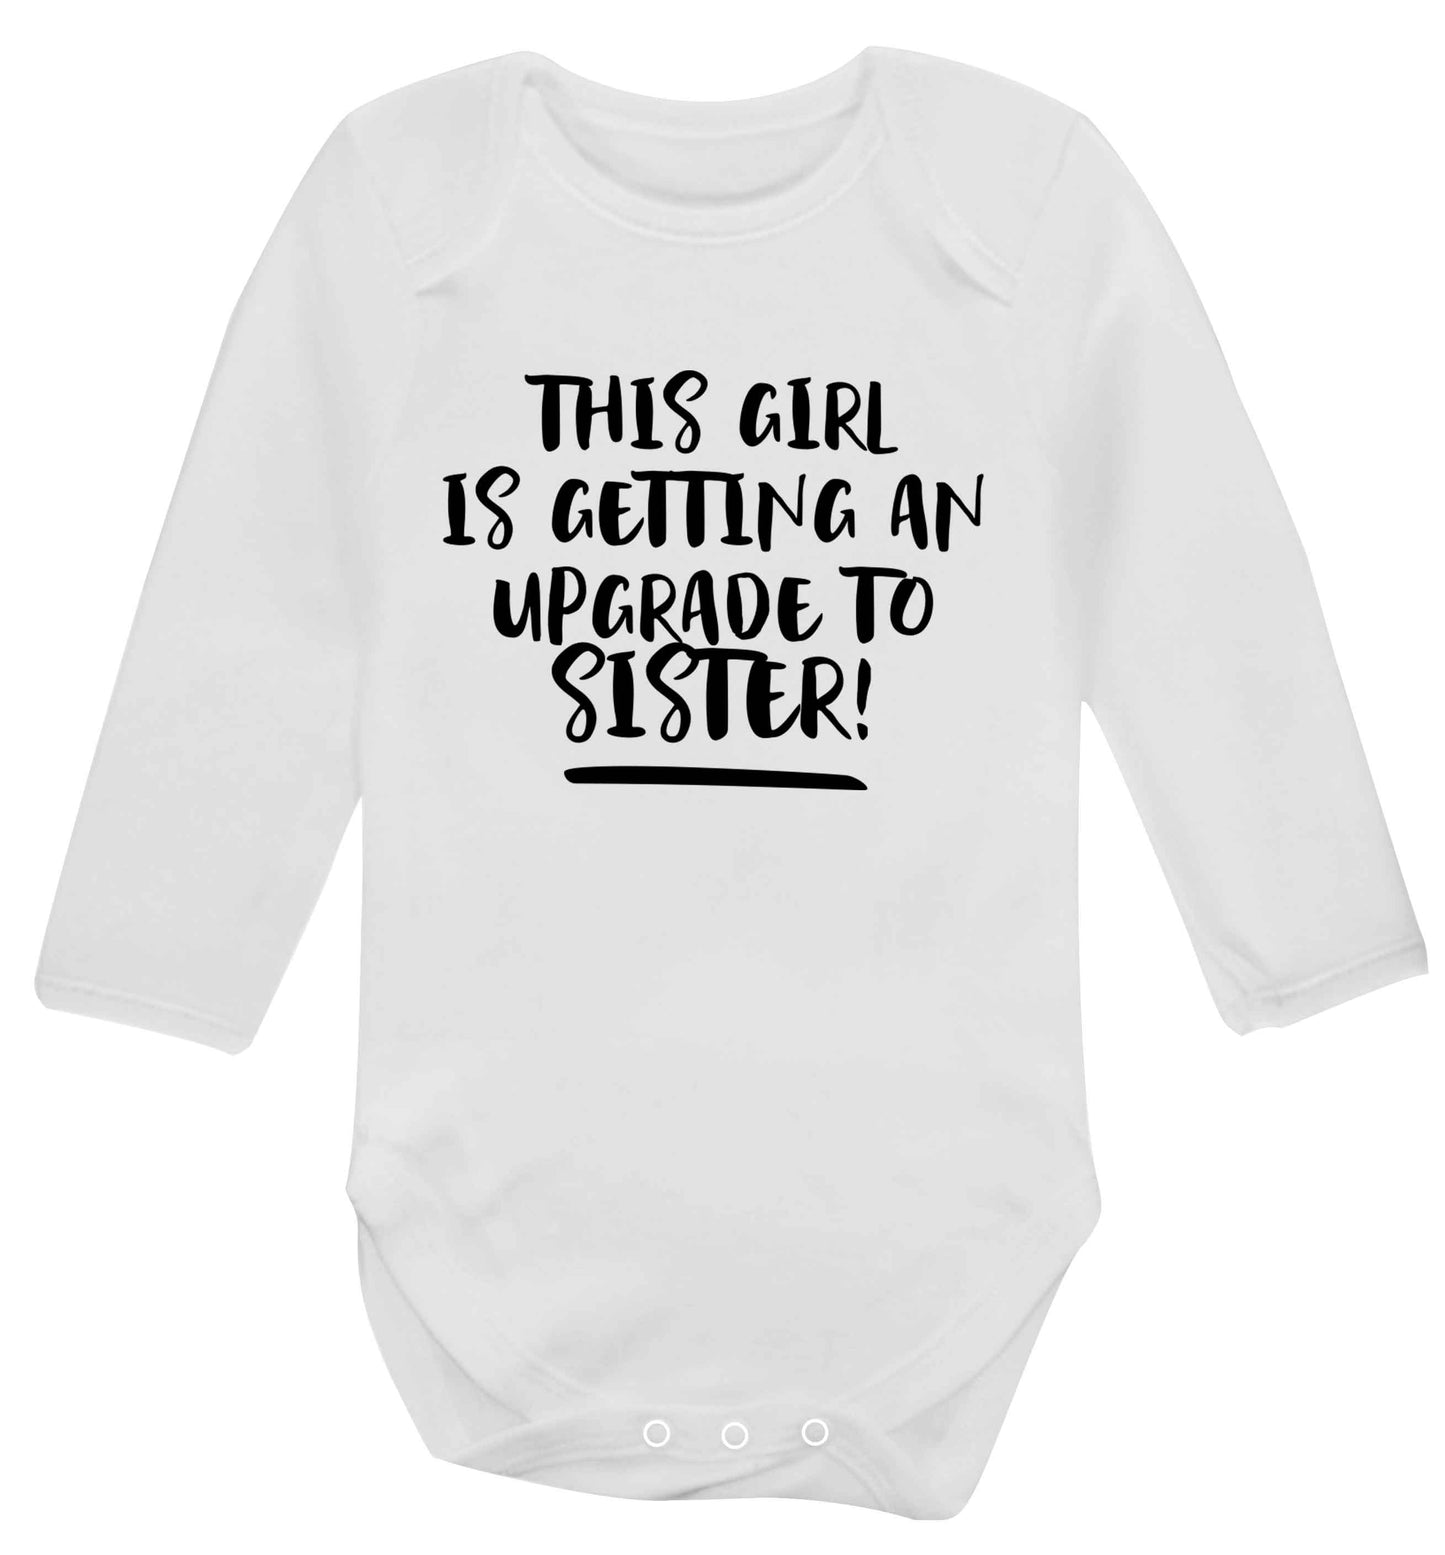 This girl is getting an upgrade to sister! Baby Vest long sleeved white 6-12 months